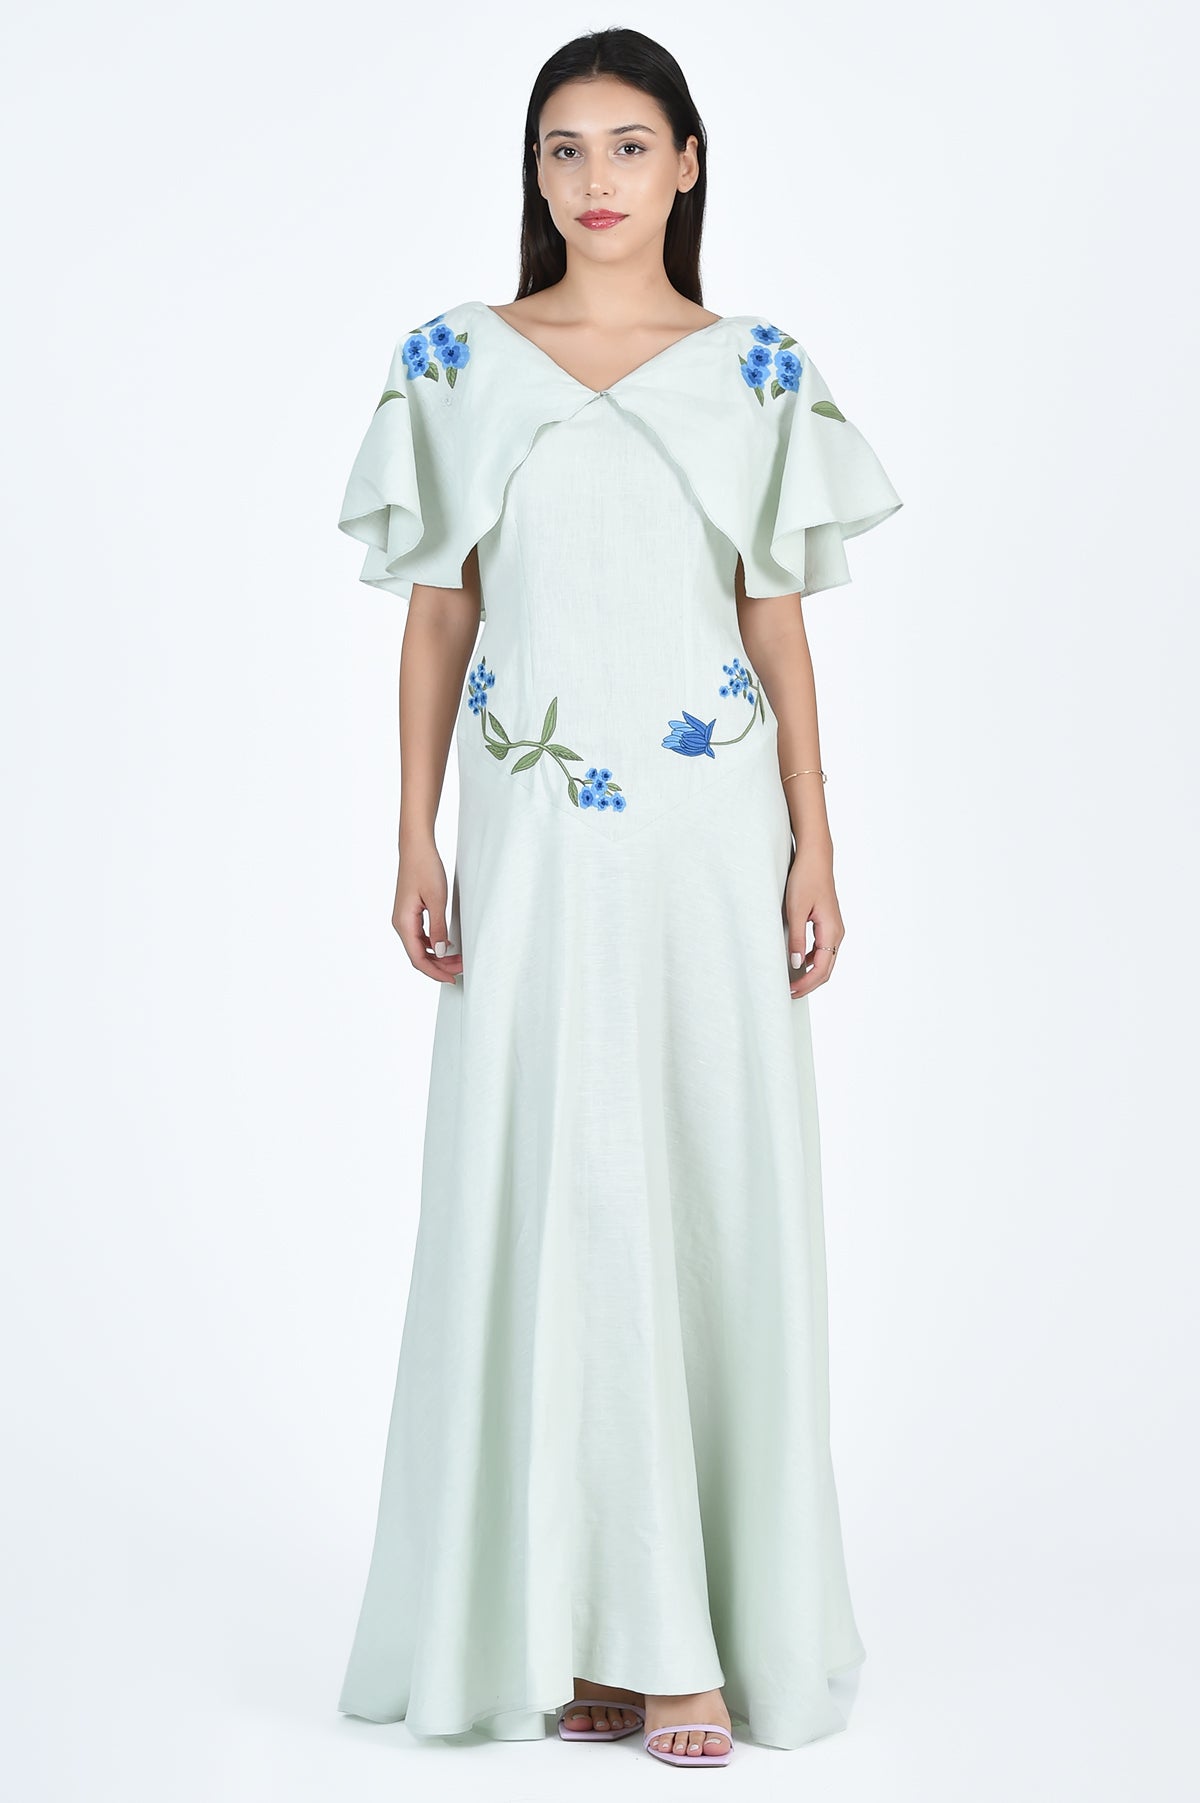 Fanm Mon Alexis Dress in Mint (Wombman Collection)